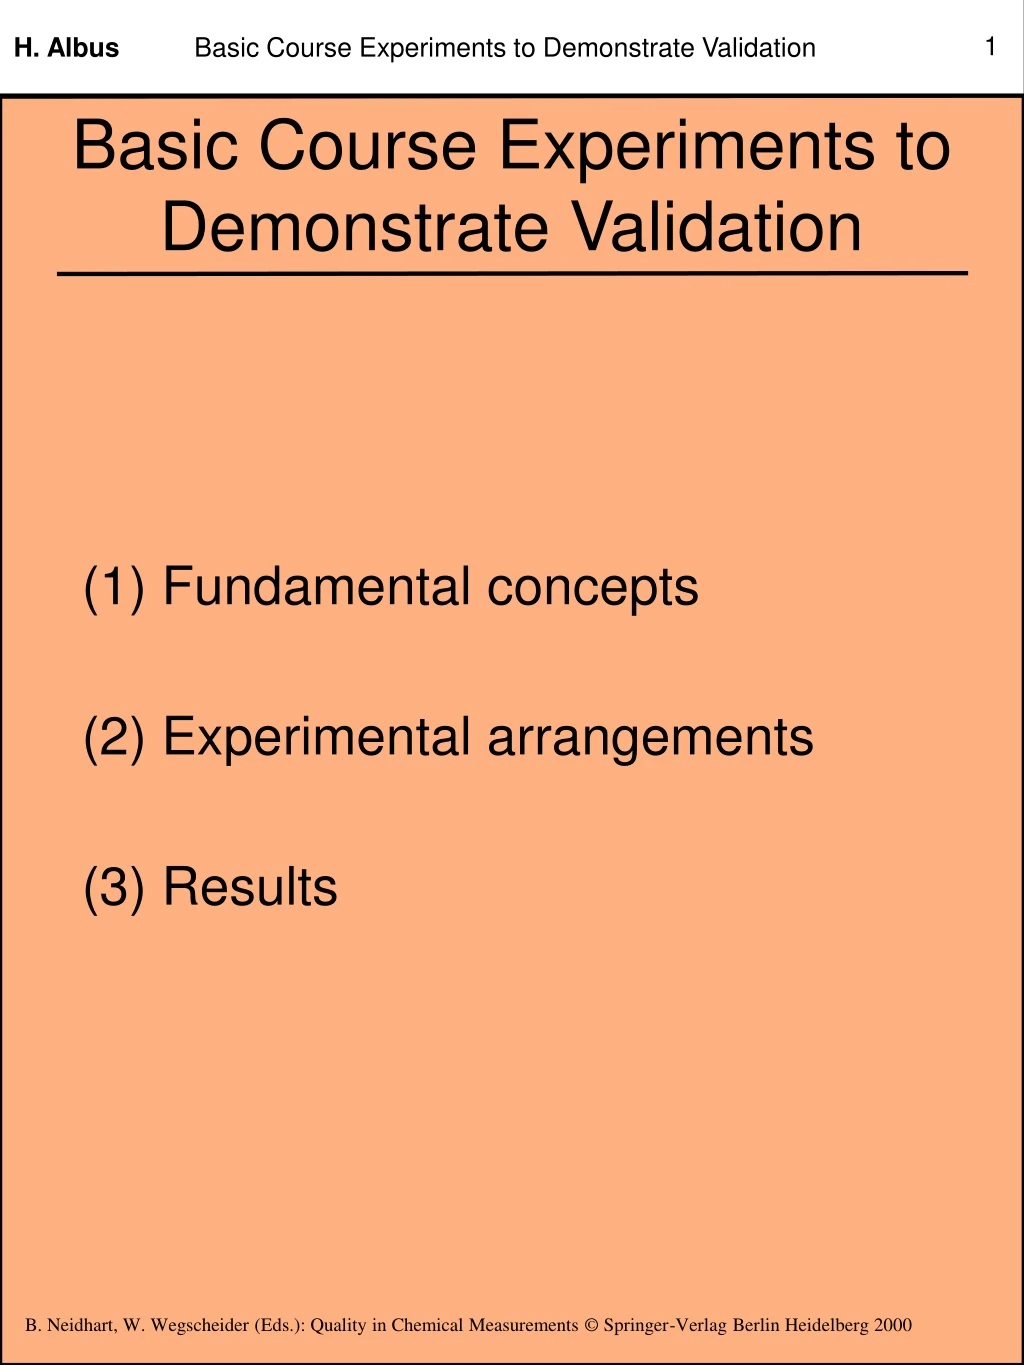 basic course experiments to demonstrate validation